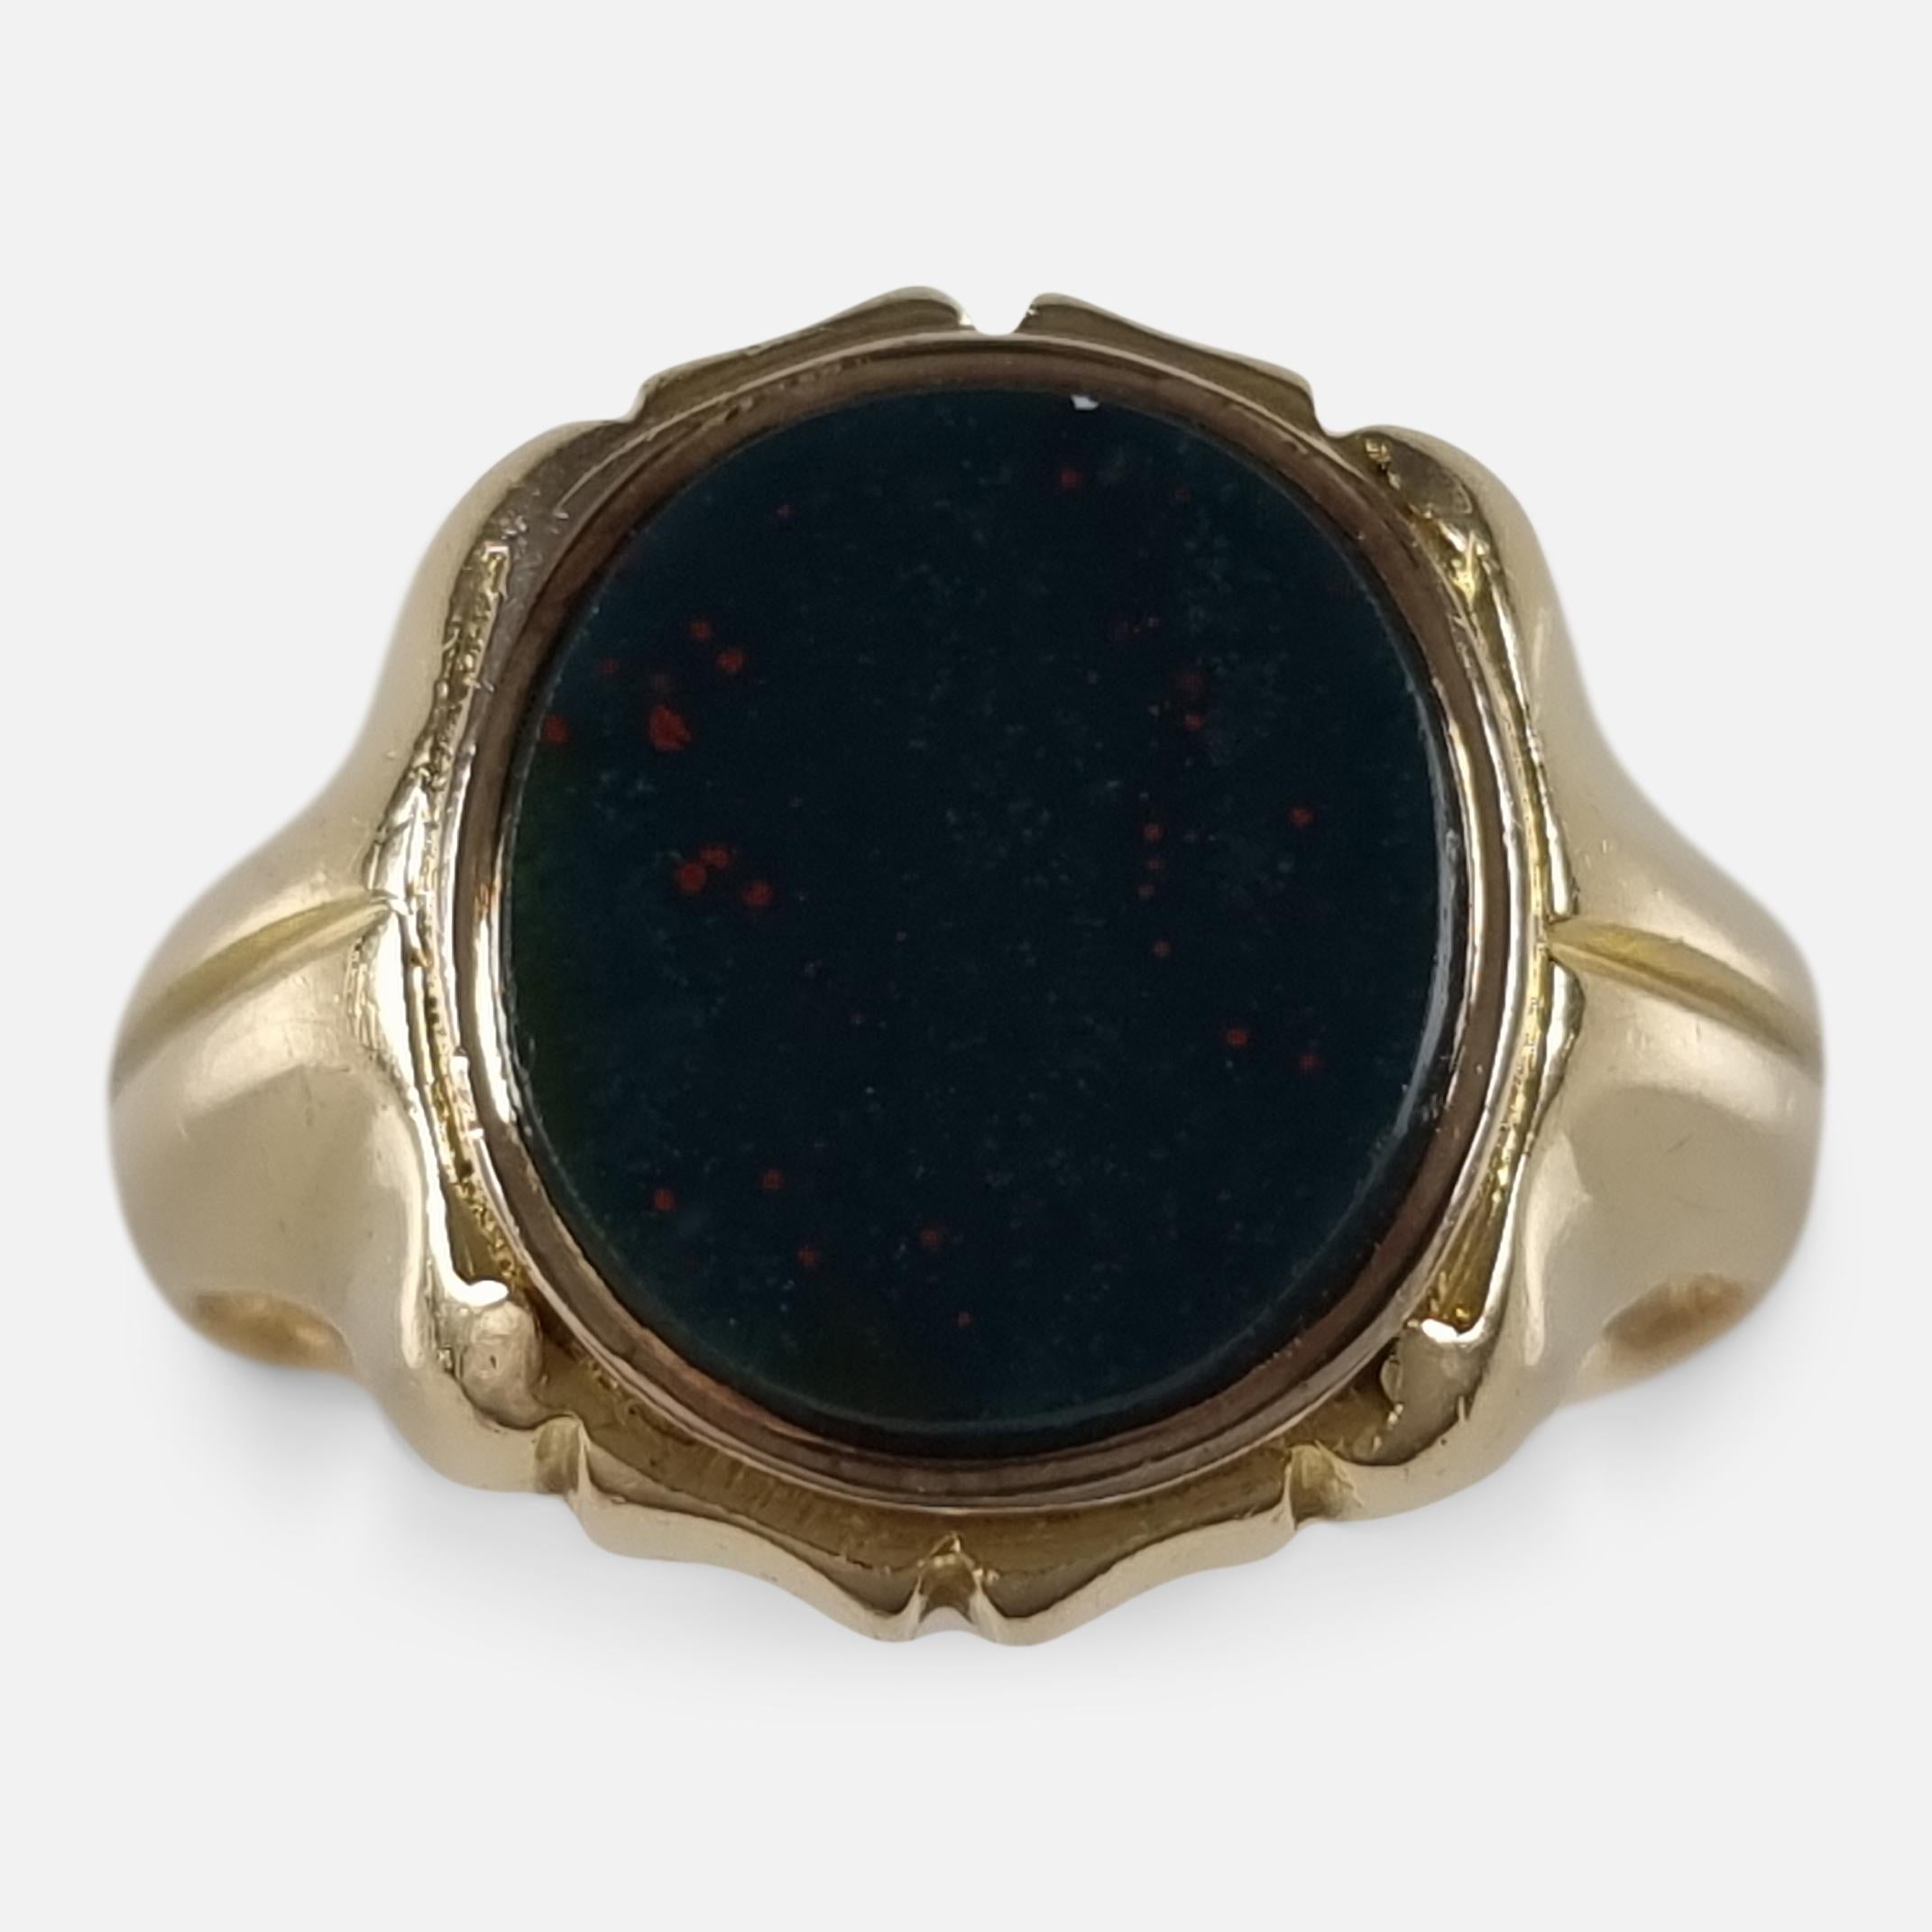 A Victorian 18ct yellow gold oval bloodstone signet ring.

The ring is hallmarked with Birmingham marks, date letter 'T' to denote 1868, and stamped '18' for 18 carat gold.

Period: - Late 19th century.

Date: - 1868.

Engraving: - None.

Maker: -